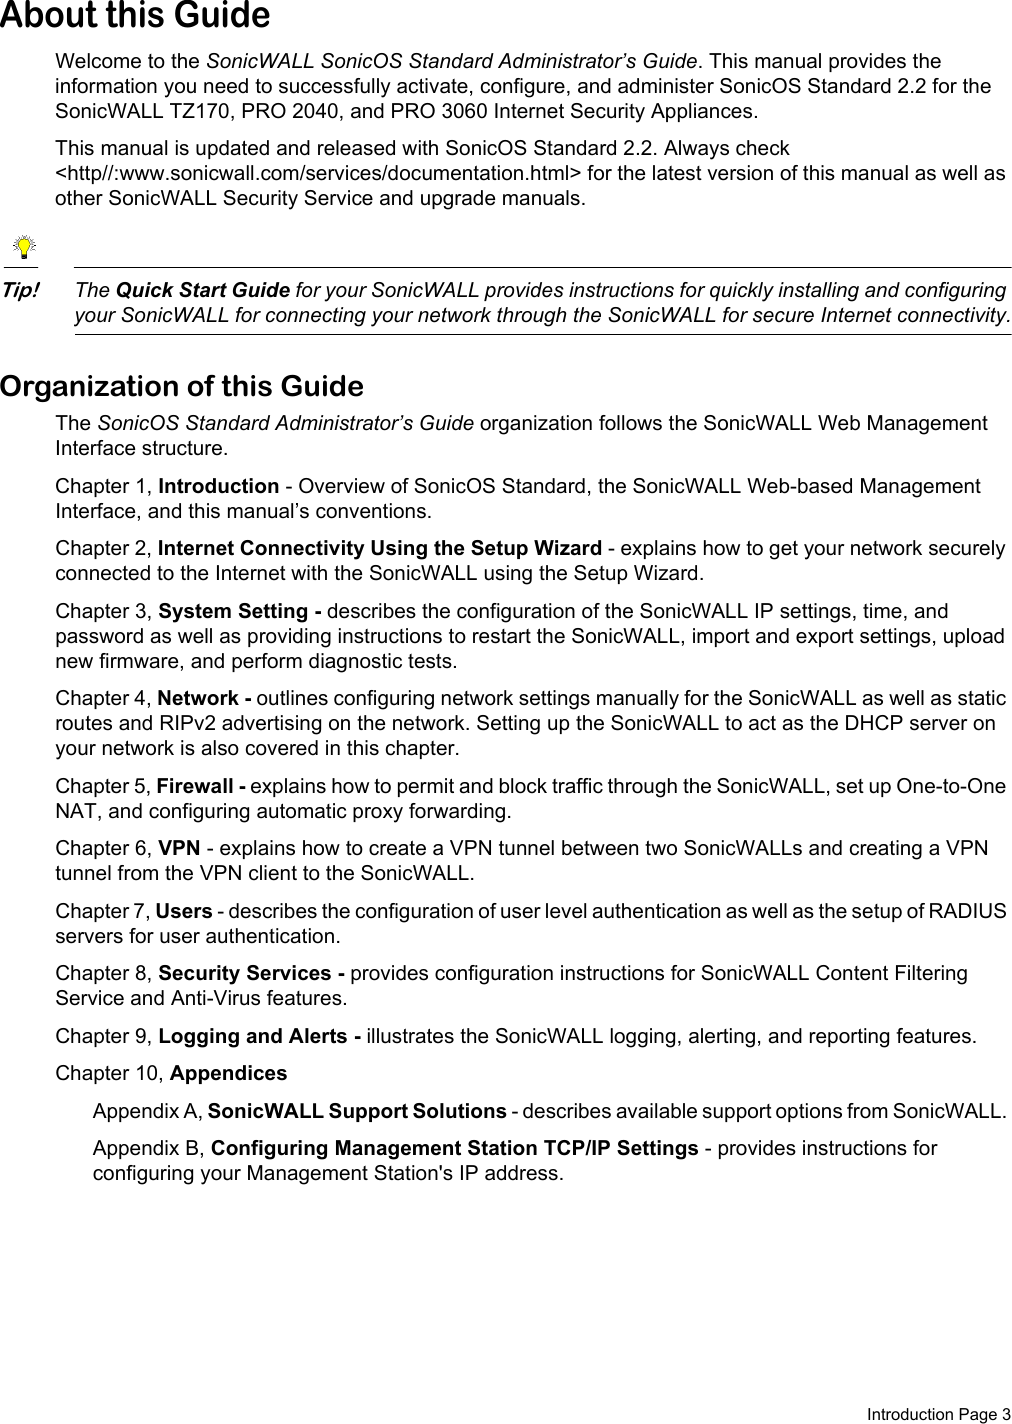  Introduction Page 3About this GuideWelcome to the SonicWALL SonicOS Standard Administrator’s Guide. This manual provides the information you need to successfully activate, configure, and administer SonicOS Standard 2.2 for the SonicWALL TZ170, PRO 2040, and PRO 3060 Internet Security Appliances.This manual is updated and released with SonicOS Standard 2.2. Always check &lt;http//:www.sonicwall.com/services/documentation.html&gt; for the latest version of this manual as well as other SonicWALL Security Service and upgrade manuals.Tip!The Quick Start Guide for your SonicWALL provides instructions for quickly installing and configuring your SonicWALL for connecting your network through the SonicWALL for secure Internet connectivity.Organization of this GuideThe SonicOS Standard Administrator’s Guide organization follows the SonicWALL Web Management Interface structure.Chapter 1, Introduction - Overview of SonicOS Standard, the SonicWALL Web-based Management Interface, and this manual’s conventions.Chapter 2, Internet Connectivity Using the Setup Wizard - explains how to get your network securely connected to the Internet with the SonicWALL using the Setup Wizard.Chapter 3, System Setting - describes the configuration of the SonicWALL IP settings, time, and password as well as providing instructions to restart the SonicWALL, import and export settings, upload new firmware, and perform diagnostic tests.Chapter 4, Network - outlines configuring network settings manually for the SonicWALL as well as static routes and RIPv2 advertising on the network. Setting up the SonicWALL to act as the DHCP server on your network is also covered in this chapter. Chapter 5, Firewall - explains how to permit and block traffic through the SonicWALL, set up One-to-One NAT, and configuring automatic proxy forwarding.Chapter 6, VPN - explains how to create a VPN tunnel between two SonicWALLs and creating a VPN tunnel from the VPN client to the SonicWALL.Chapter 7, Users - describes the configuration of user level authentication as well as the setup of RADIUS servers for user authentication. Chapter 8, Security Services - provides configuration instructions for SonicWALL Content Filtering Service and Anti-Virus features. Chapter 9, Logging and Alerts - illustrates the SonicWALL logging, alerting, and reporting features.Chapter 10, Appendices Appendix A, SonicWALL Support Solutions - describes available support options from SonicWALL. Appendix B, Configuring Management Station TCP/IP Settings - provides instructions for configuring your Management Station&apos;s IP address.